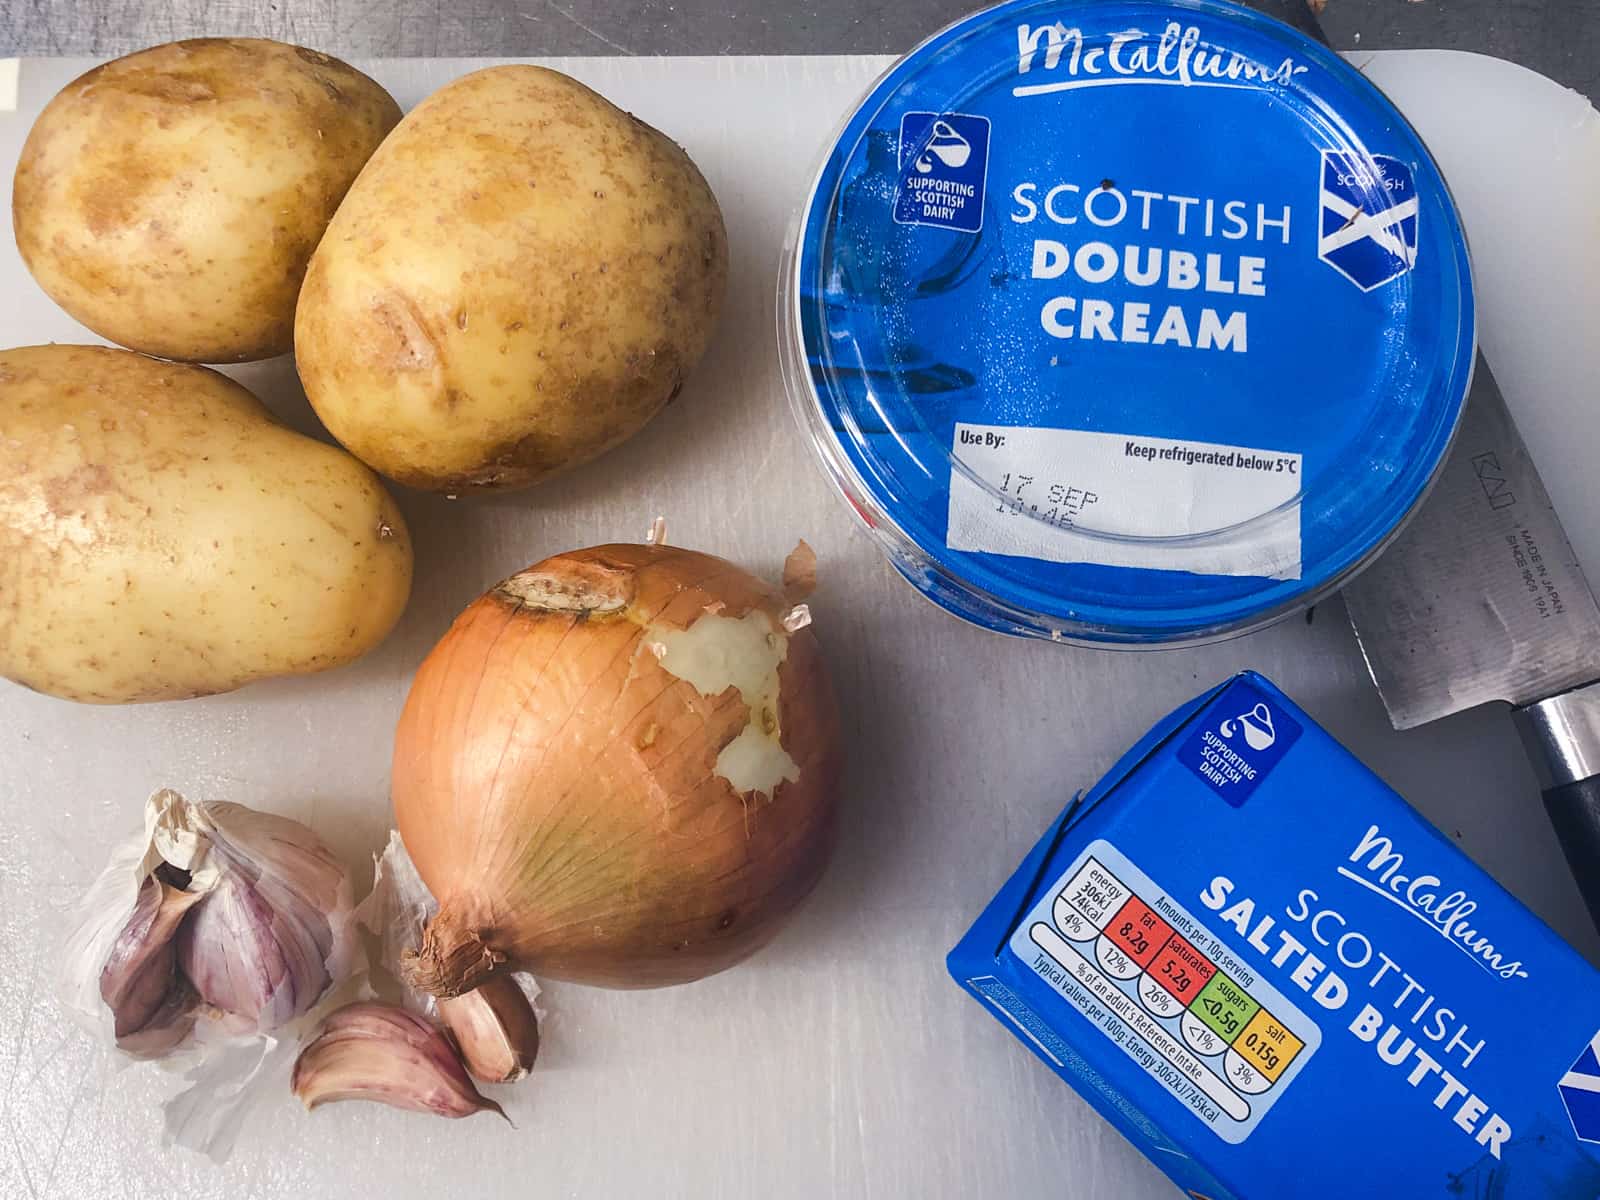 Ingredients for a potato gratin consisting of potatoes, garlic, onions, butter.